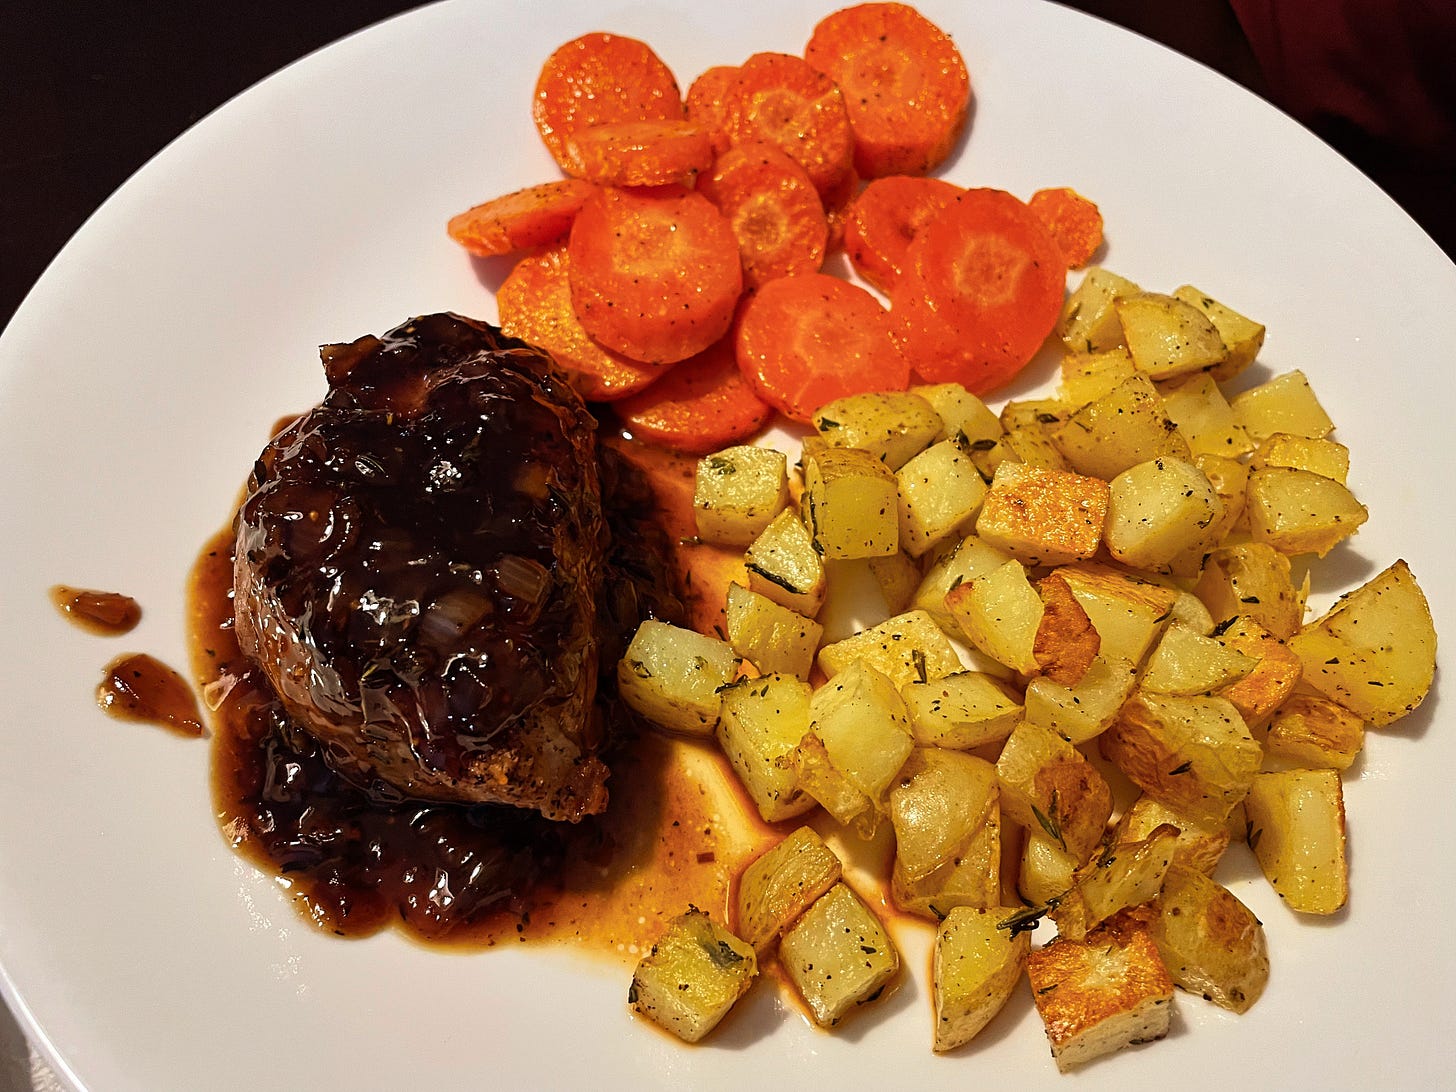 Porkchops with fig adn balsamic sauce with roasted potatoes and carrots.